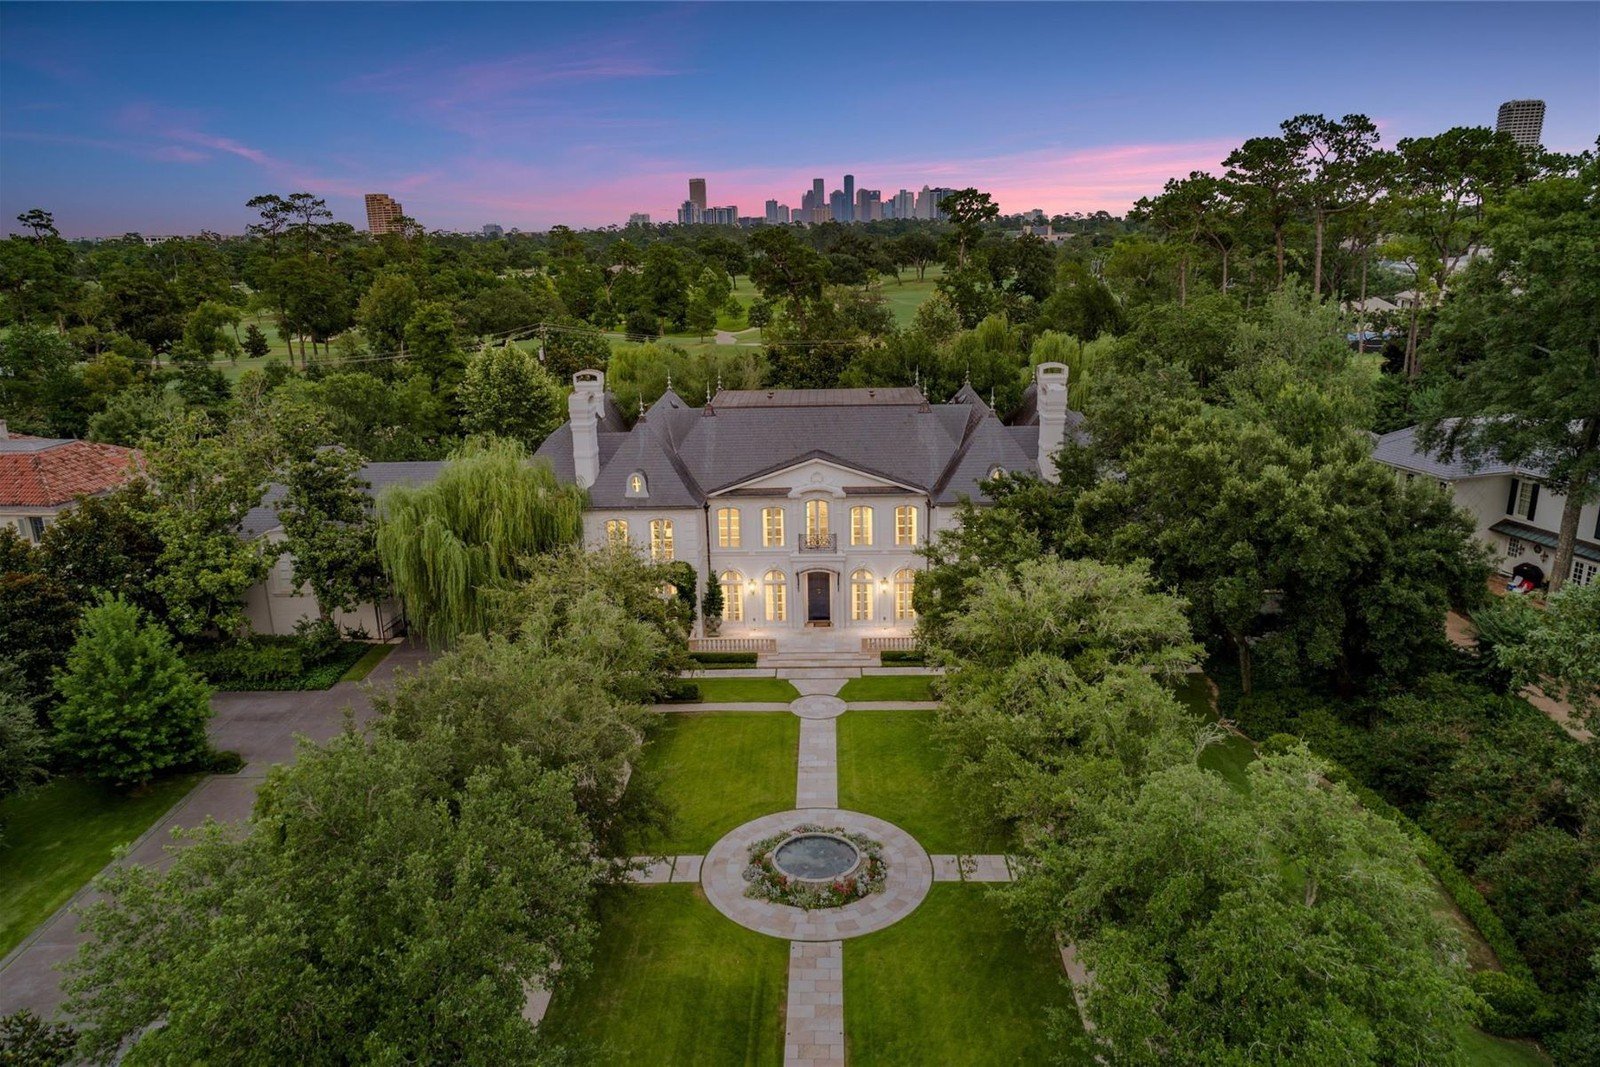 Francis York French Chateau-Style Mansion in Houston, Texas m00002.jpeg